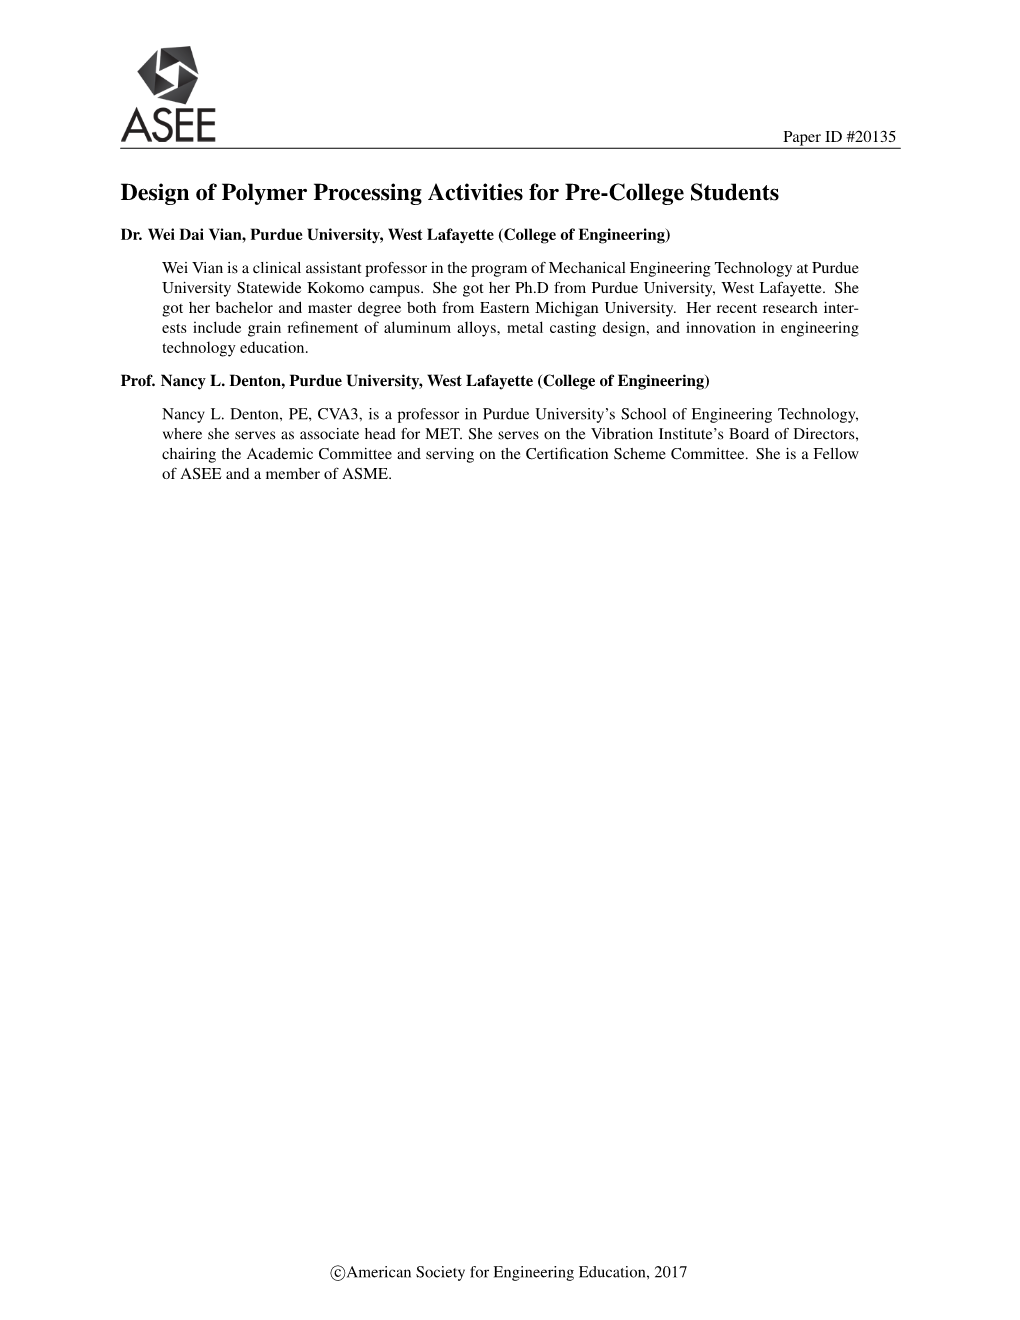 Design of Polymer Processing Activities for Pre-College Students